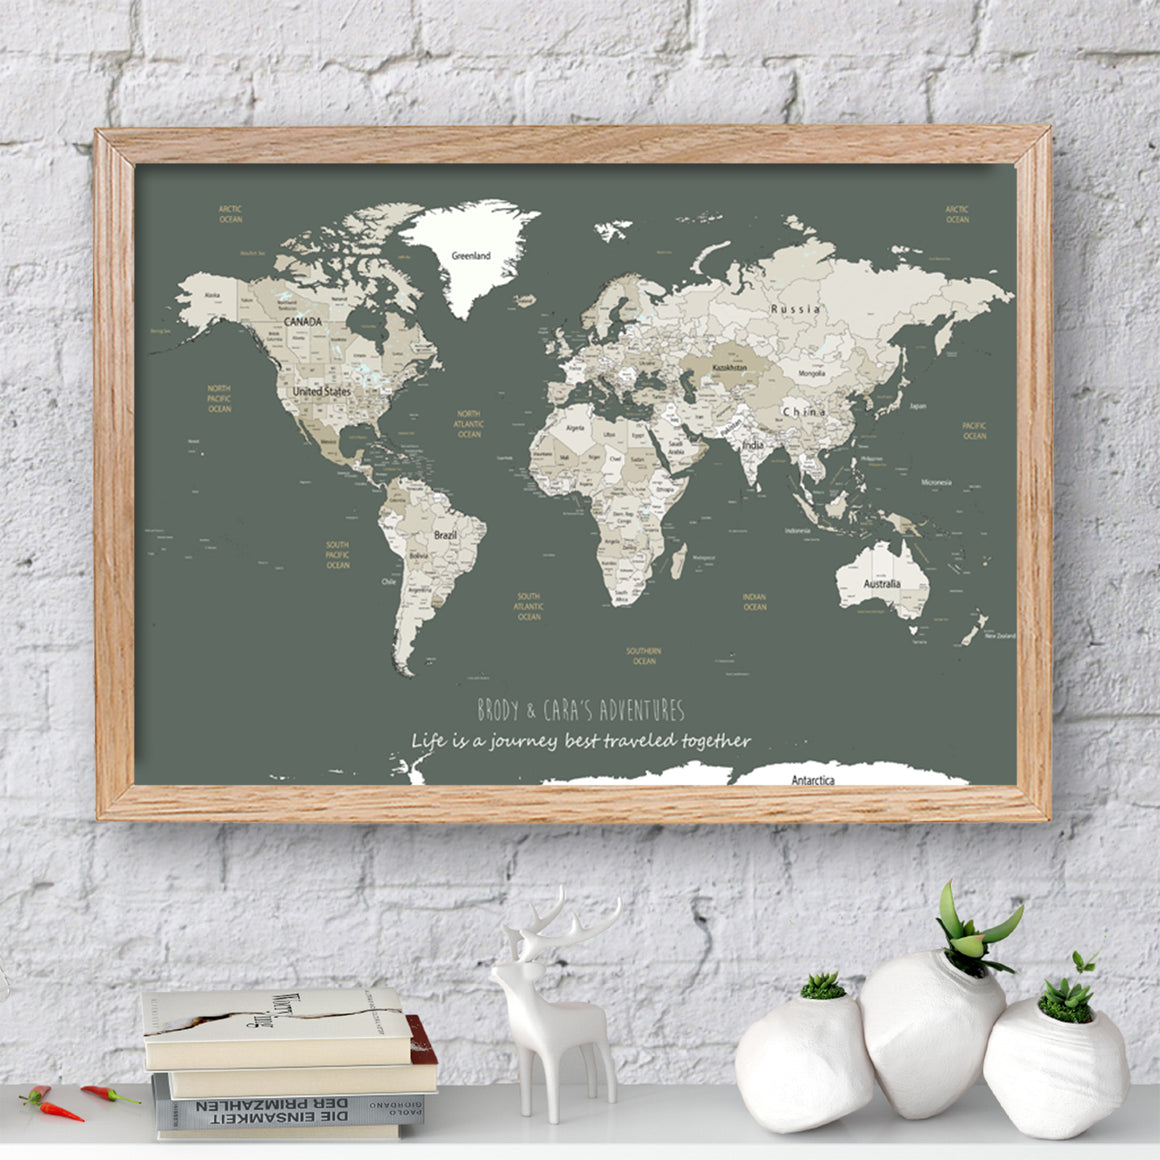 Personalised World Map Framed Pin Board Sage Green and Whites. Our World Map Pin Boards make for a great Housewarming Gift, Gift for Her, or Travel gift.  Personalised Map includes inspirational travel quote and family details.